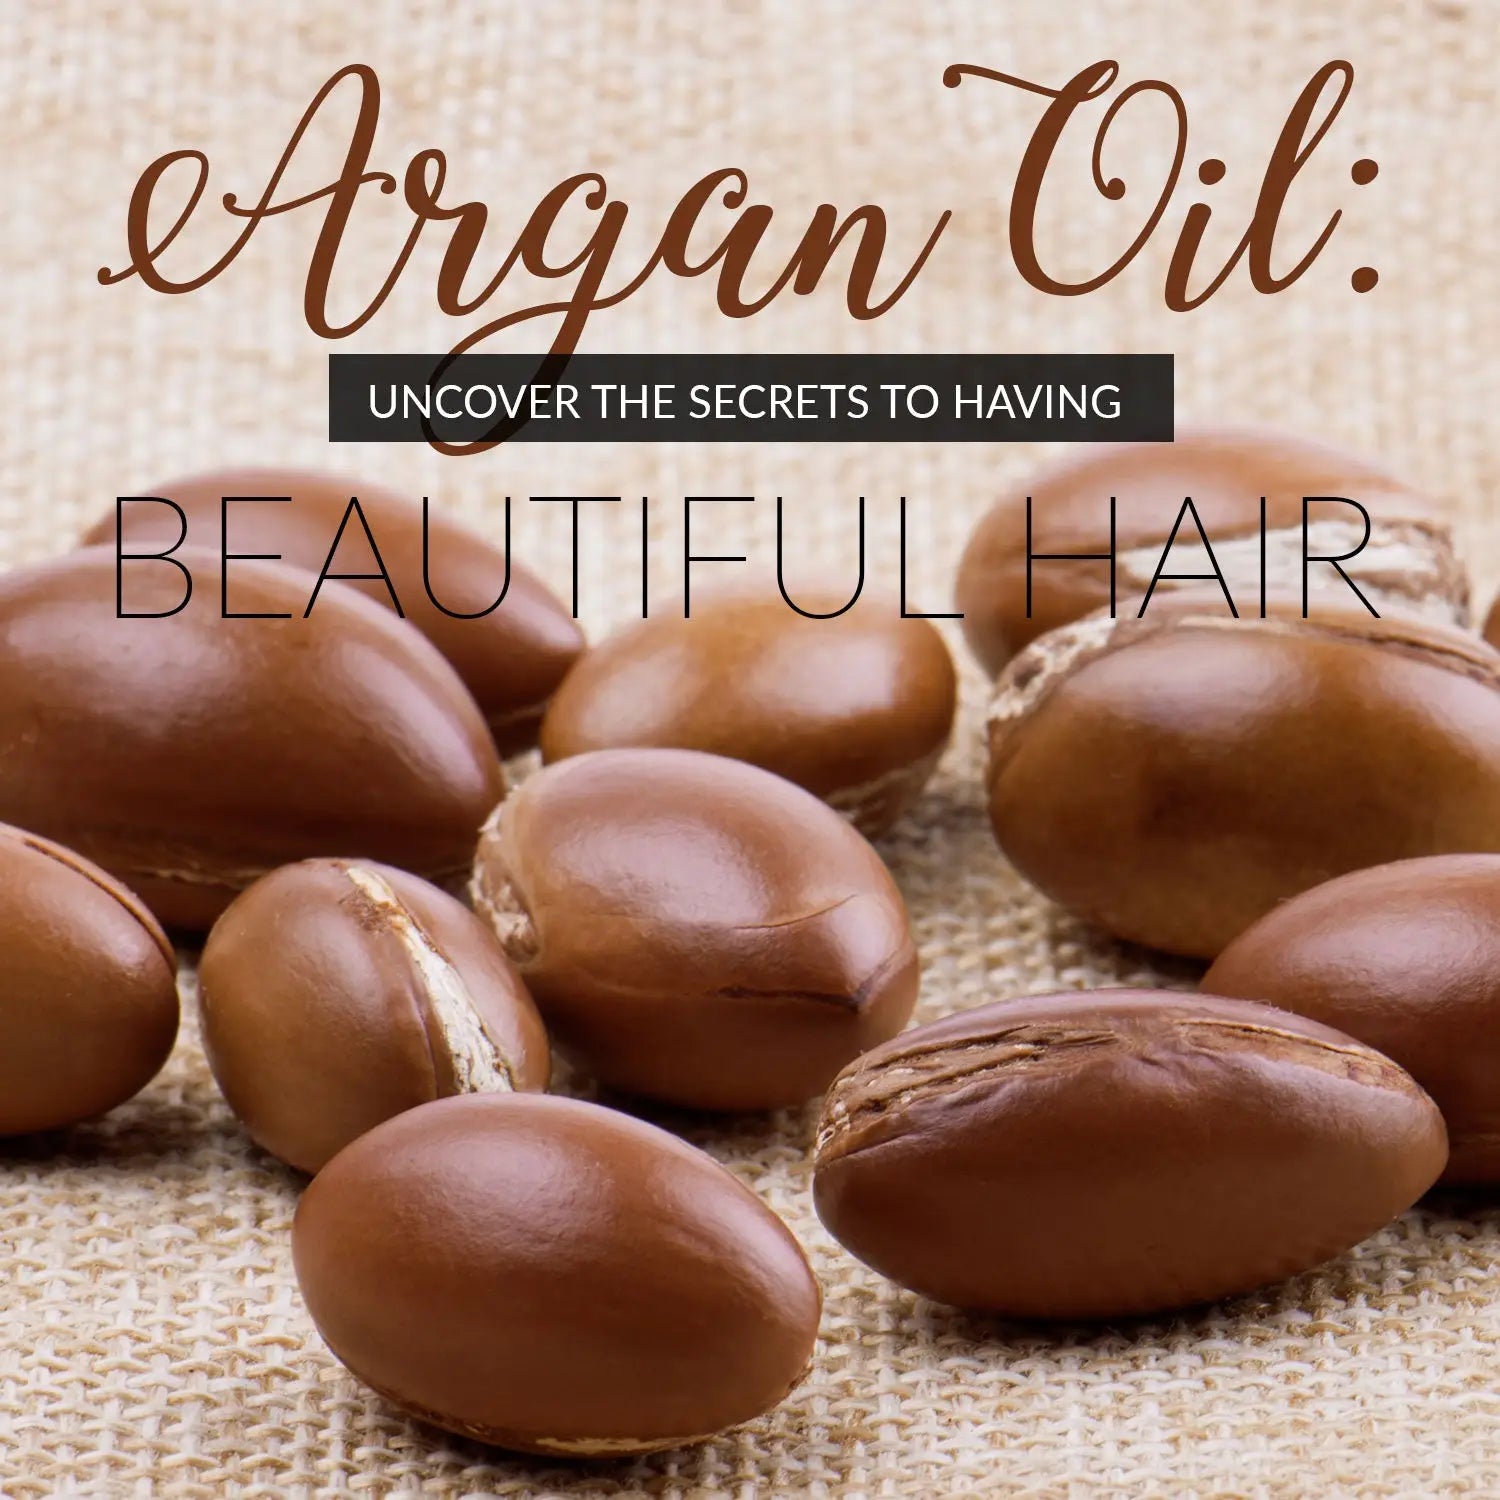 ARGAN OIL: UNCOVER THE SECRETS TO HAVING BEAUTIFUL HAIR